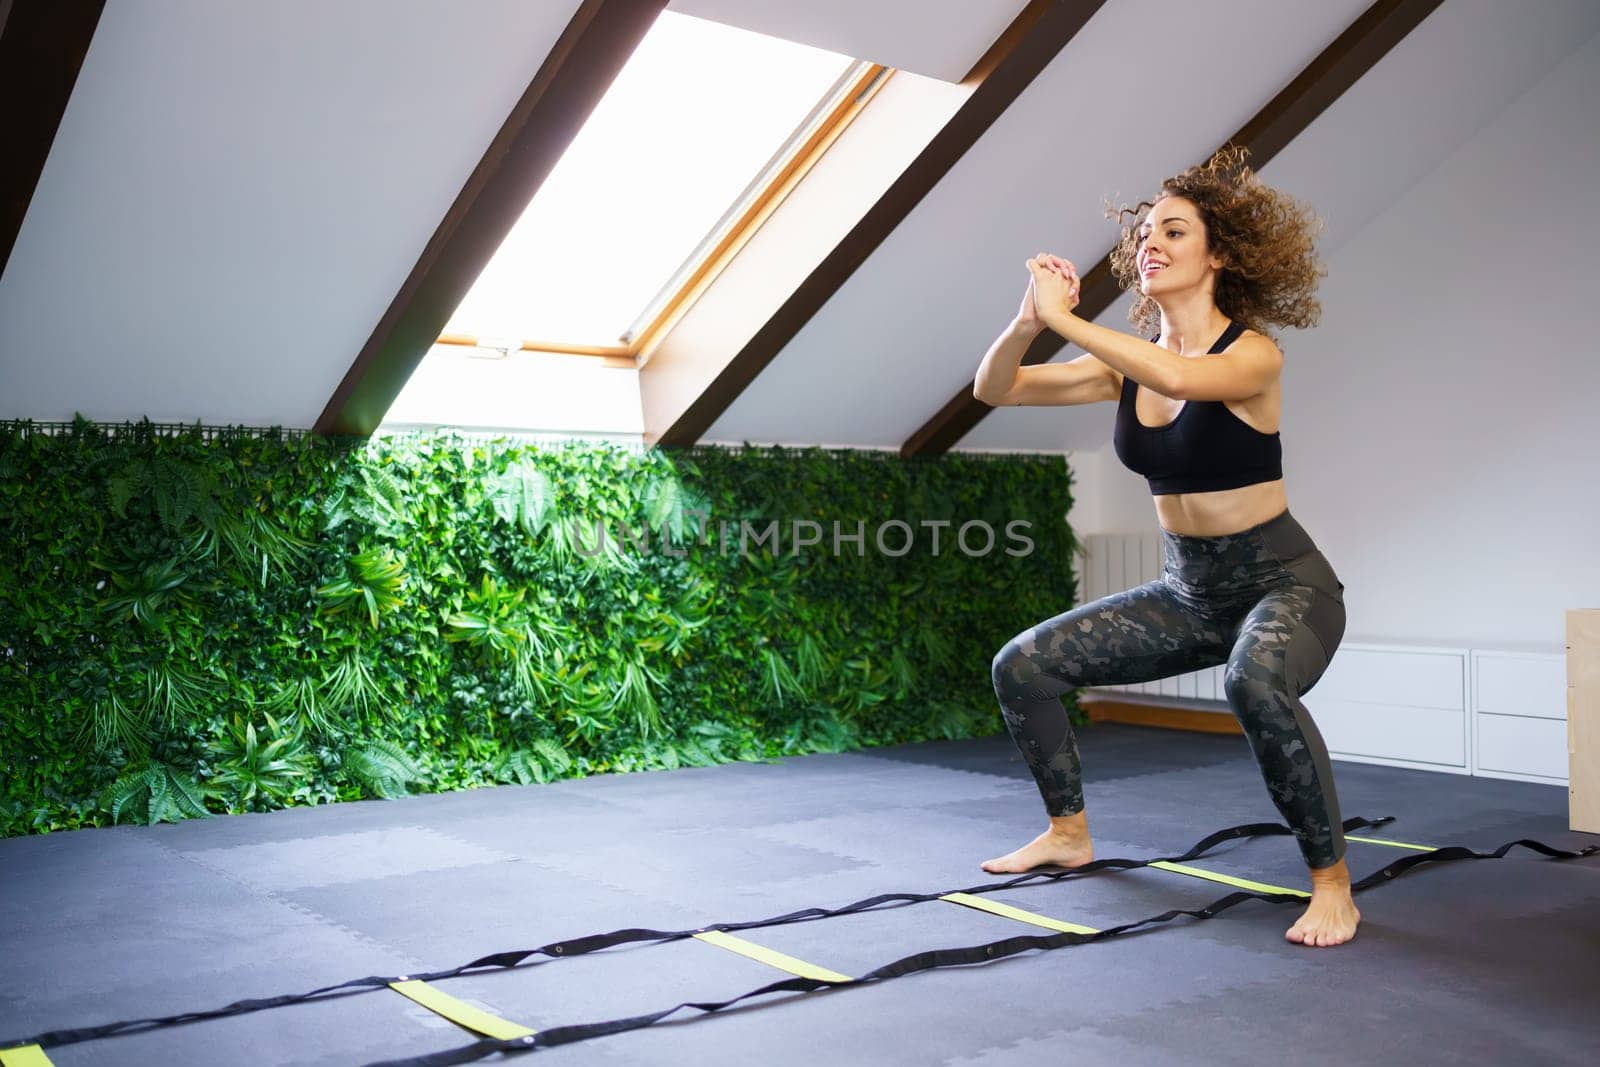 Full body of young curly haired female athlete in sportswear doing agility ladder squat jumps in gym with pitched roof